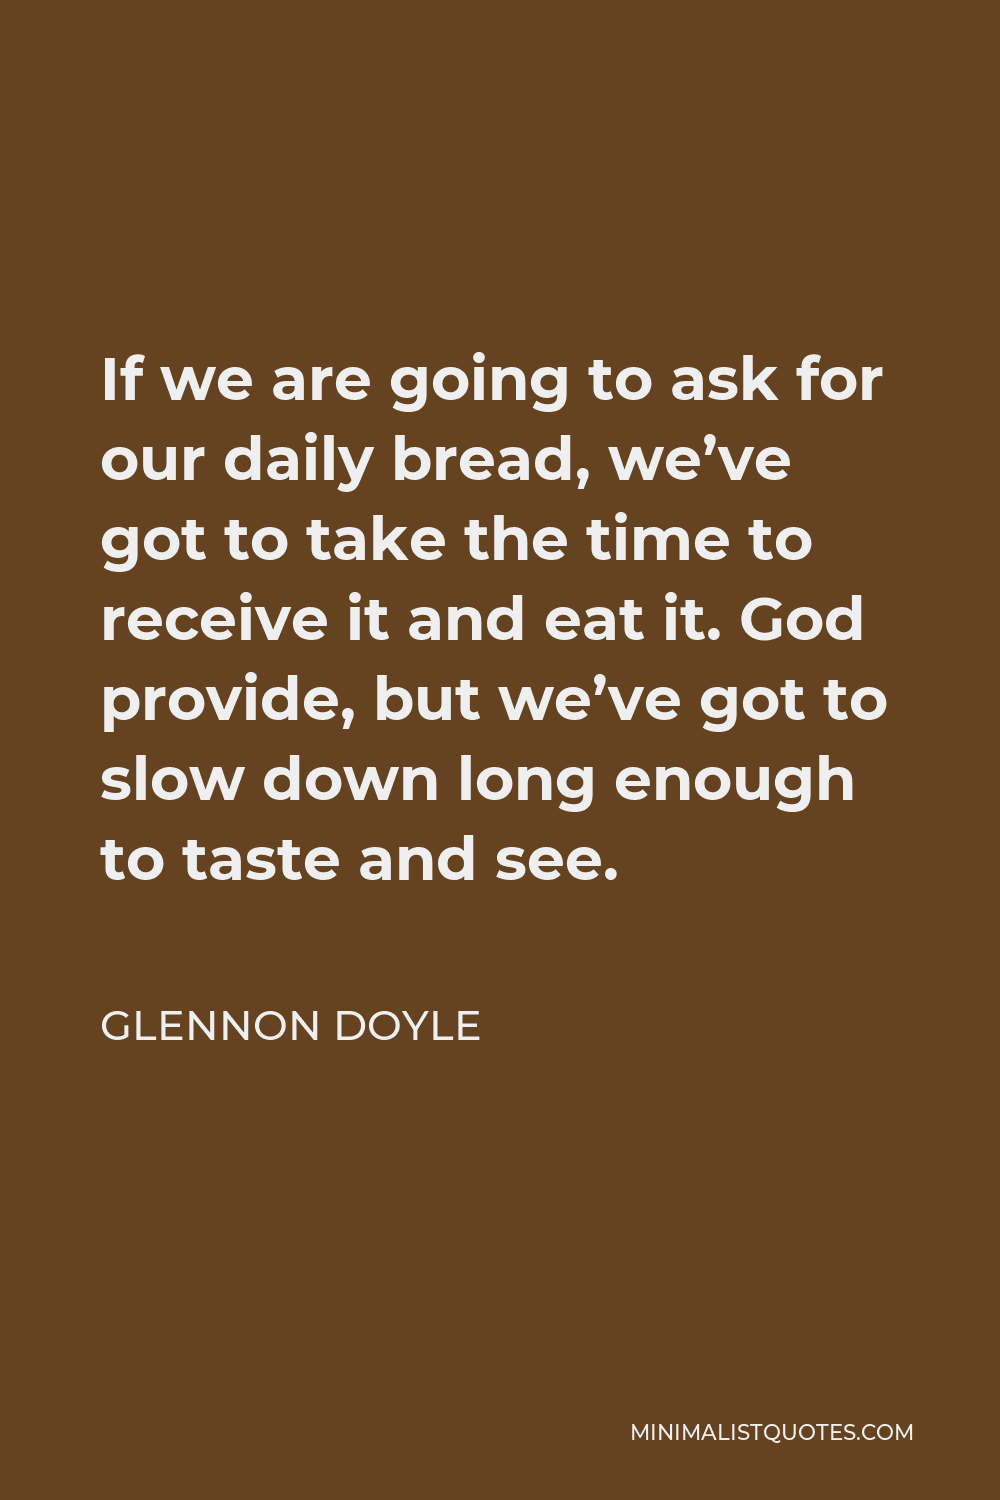 Glennon Doyle Quote - If we are going to ask for our daily bread, we’ve got to take the time to receive it and eat it. God provide, but we’ve got to slow down long enough to taste and see.